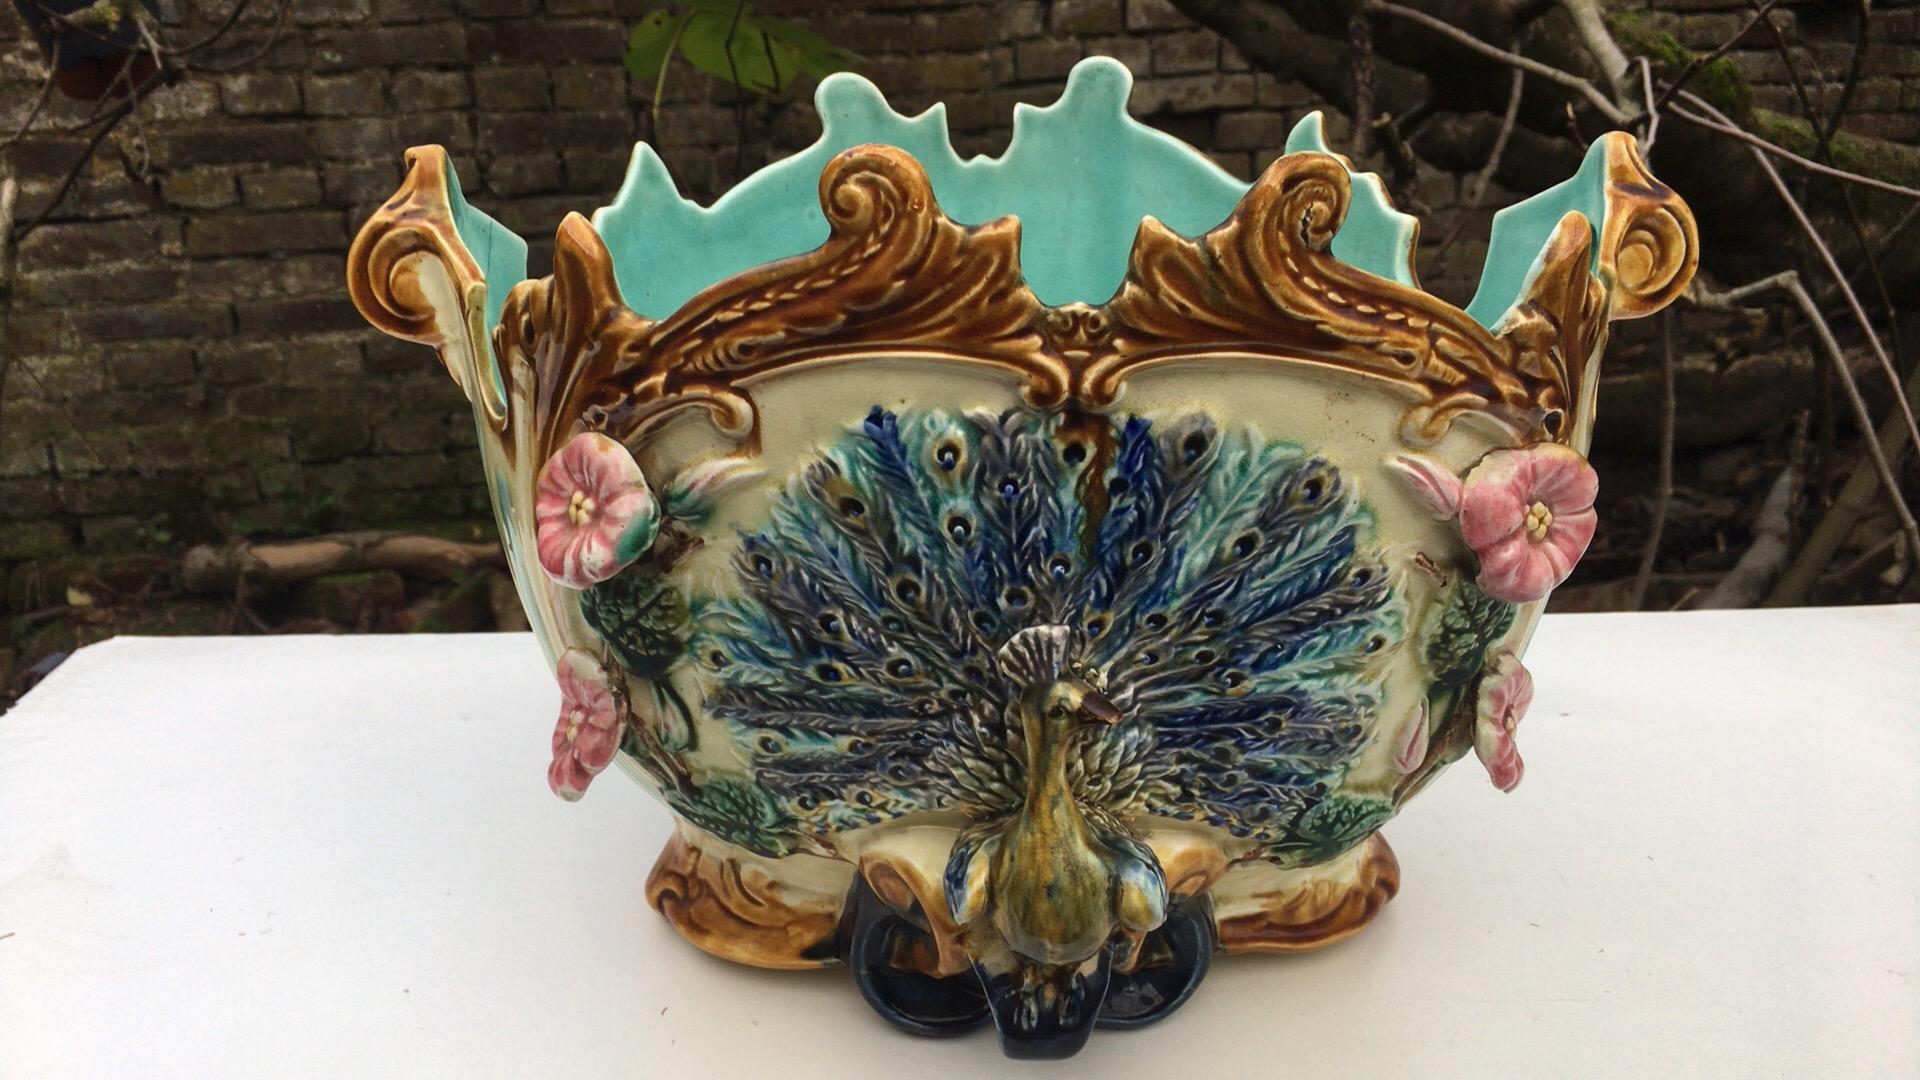 Large majolica peacock jardinière signed Onnaing, circa 1880.
Peacock on the two sides.